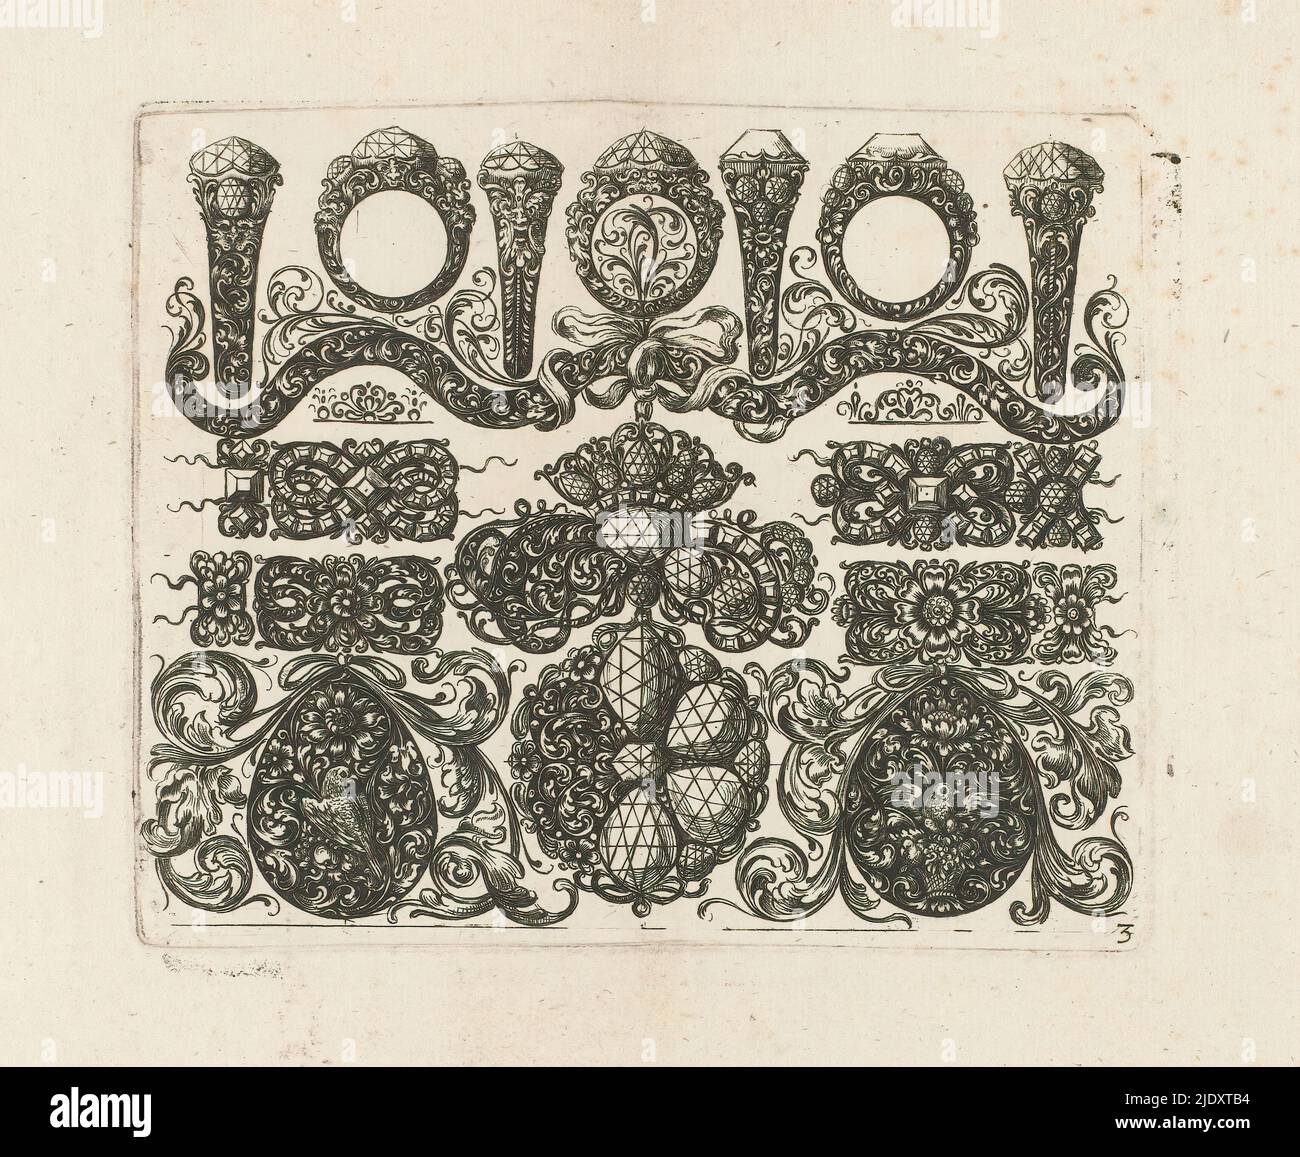 Designs for jewelry, Sheet 3 in a series of 6, print maker: Johann Wilhelm Heel, c. 1660, paper, engraving, height 115 mm × width 139 mm Stock Photo